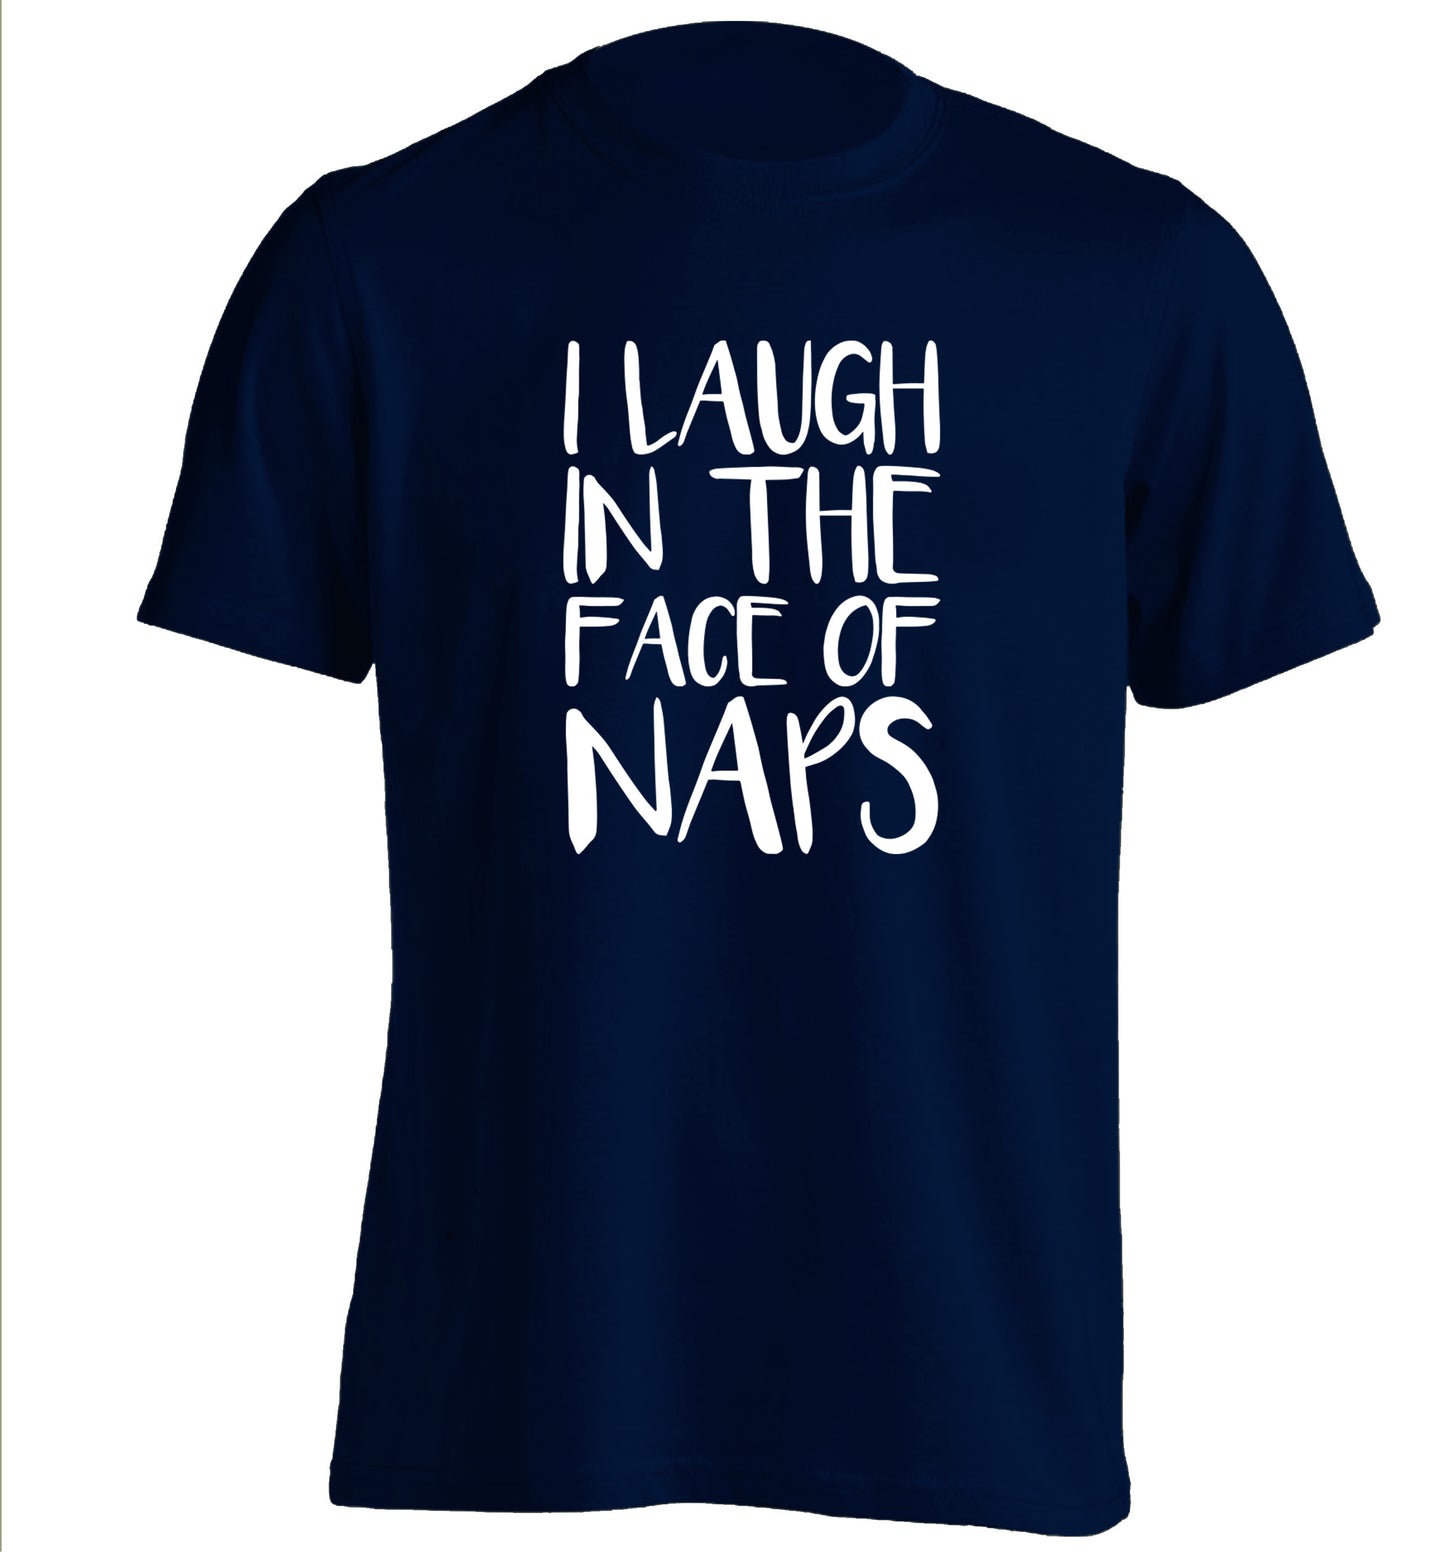 I laugh in the face of naps adults unisex navy Tshirt 2XL